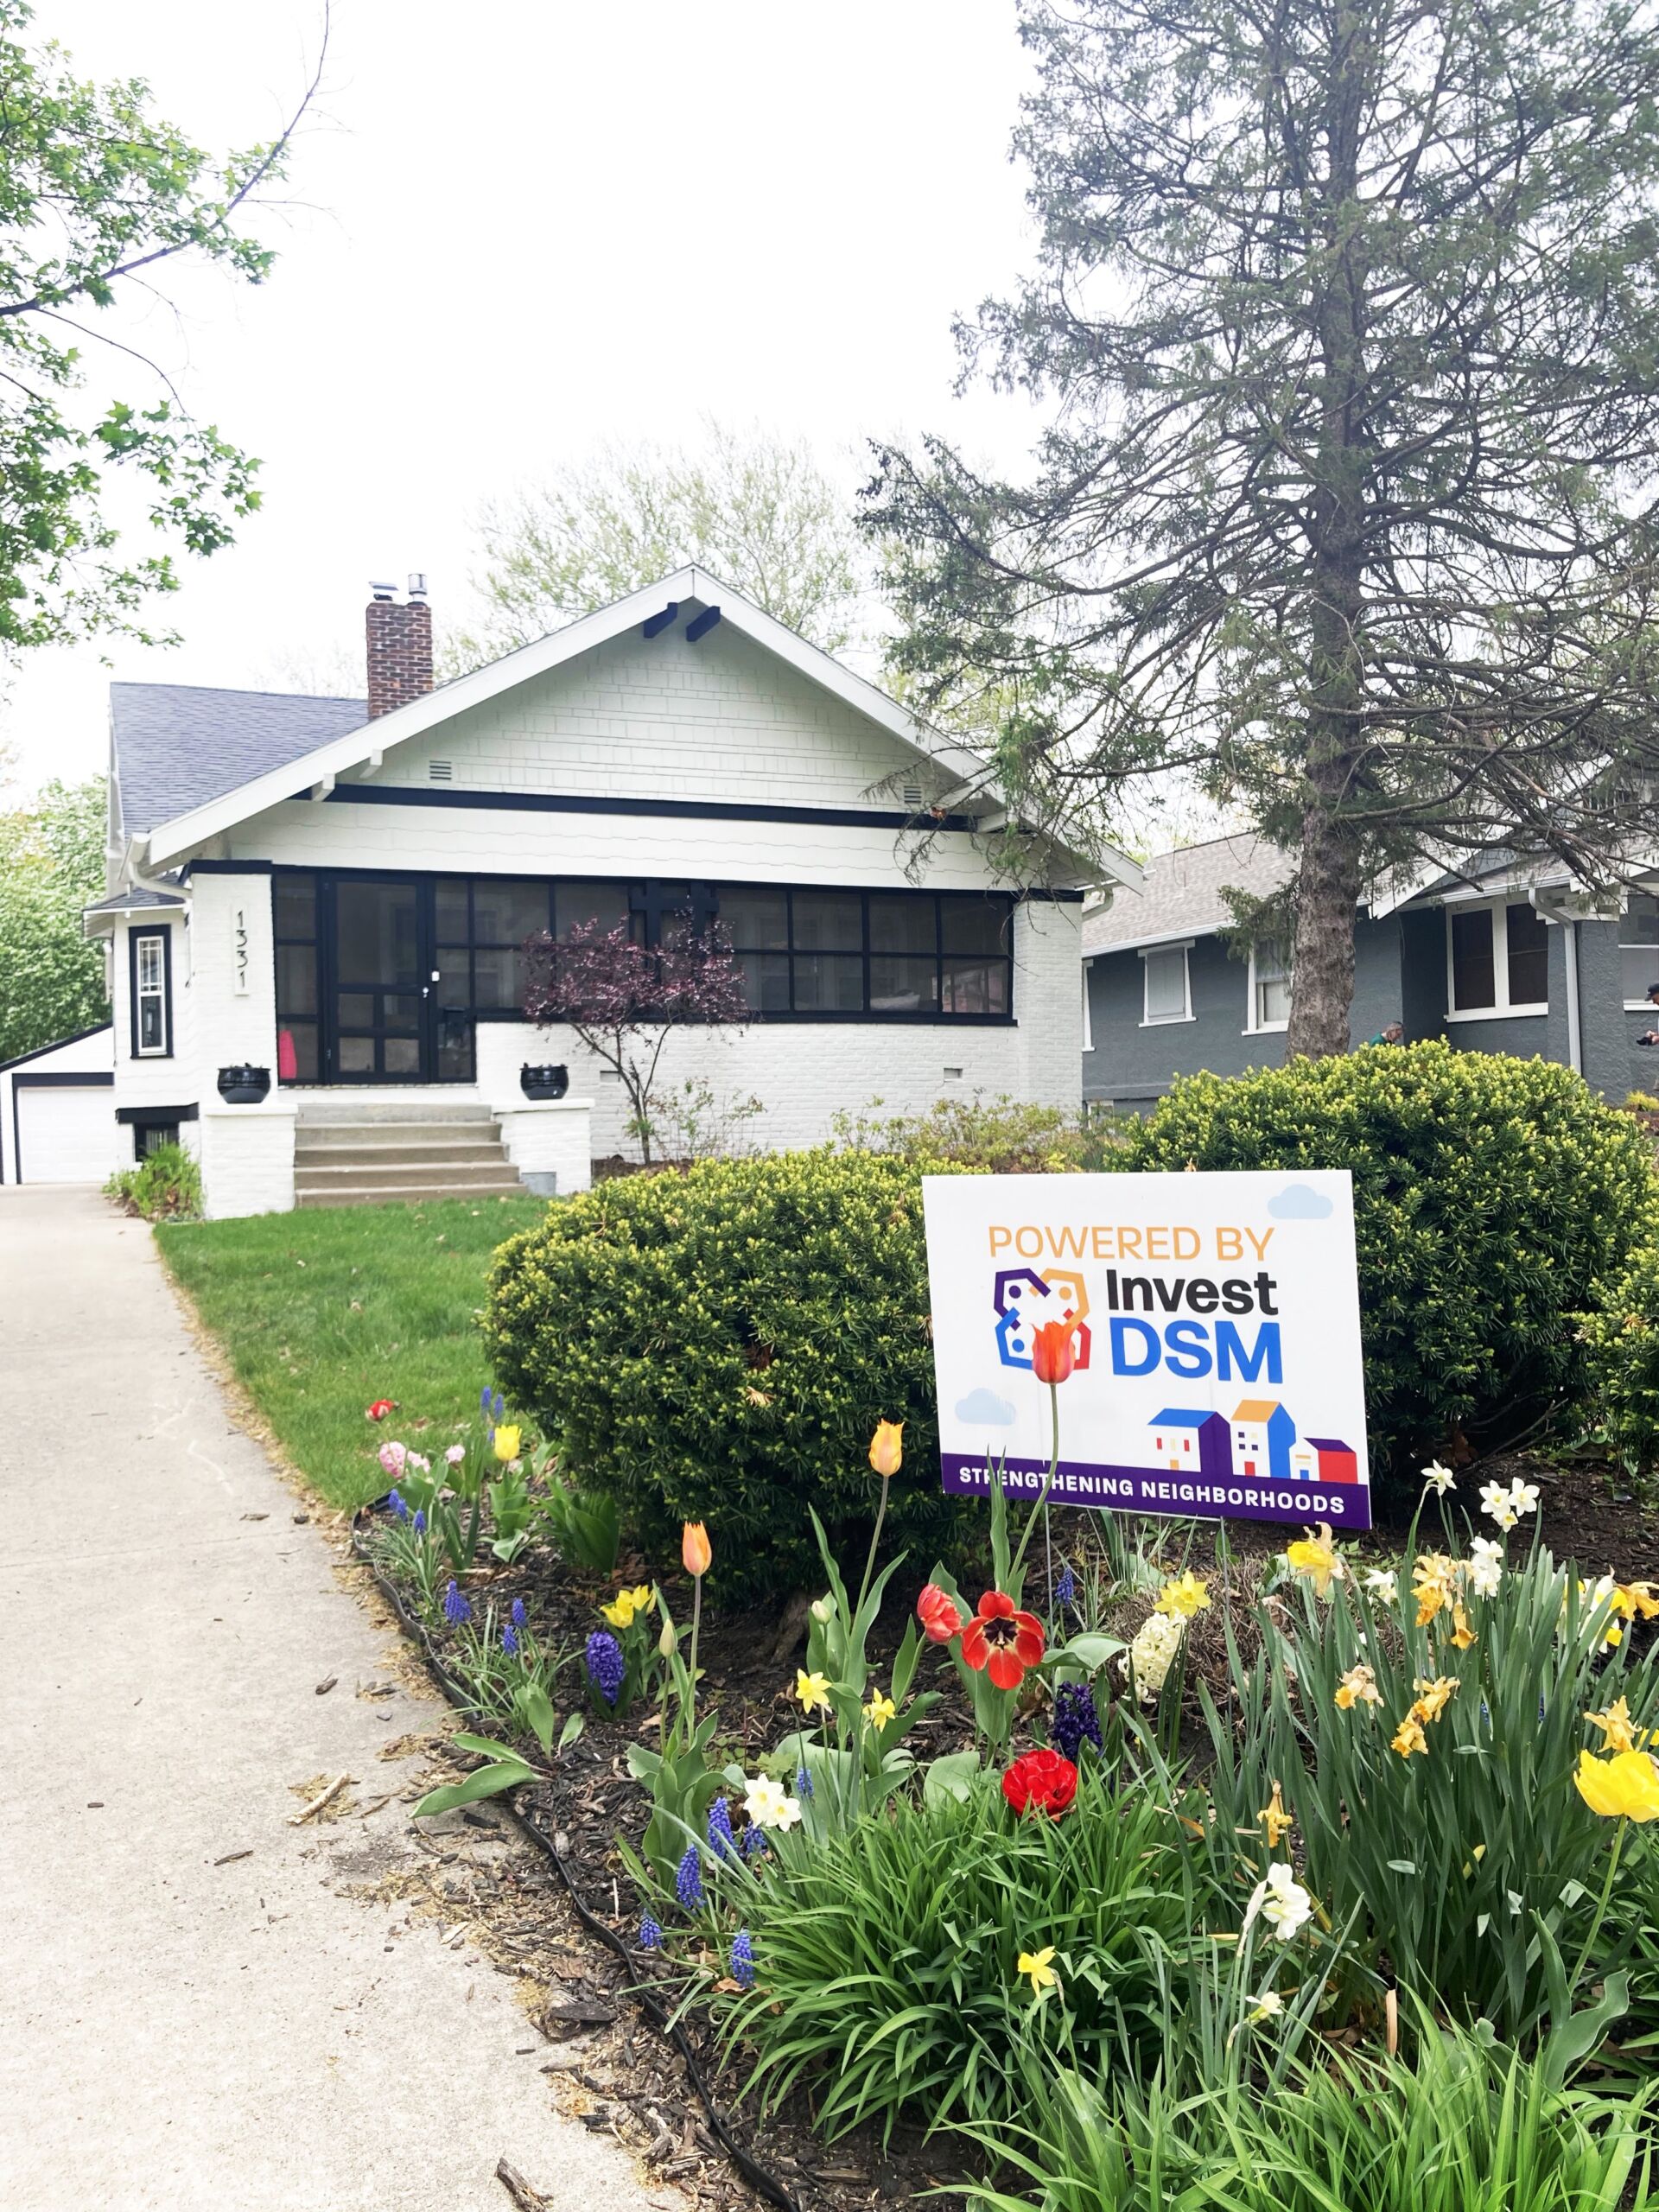 Invest DSM sign among flowers with home with updated white exterior in background